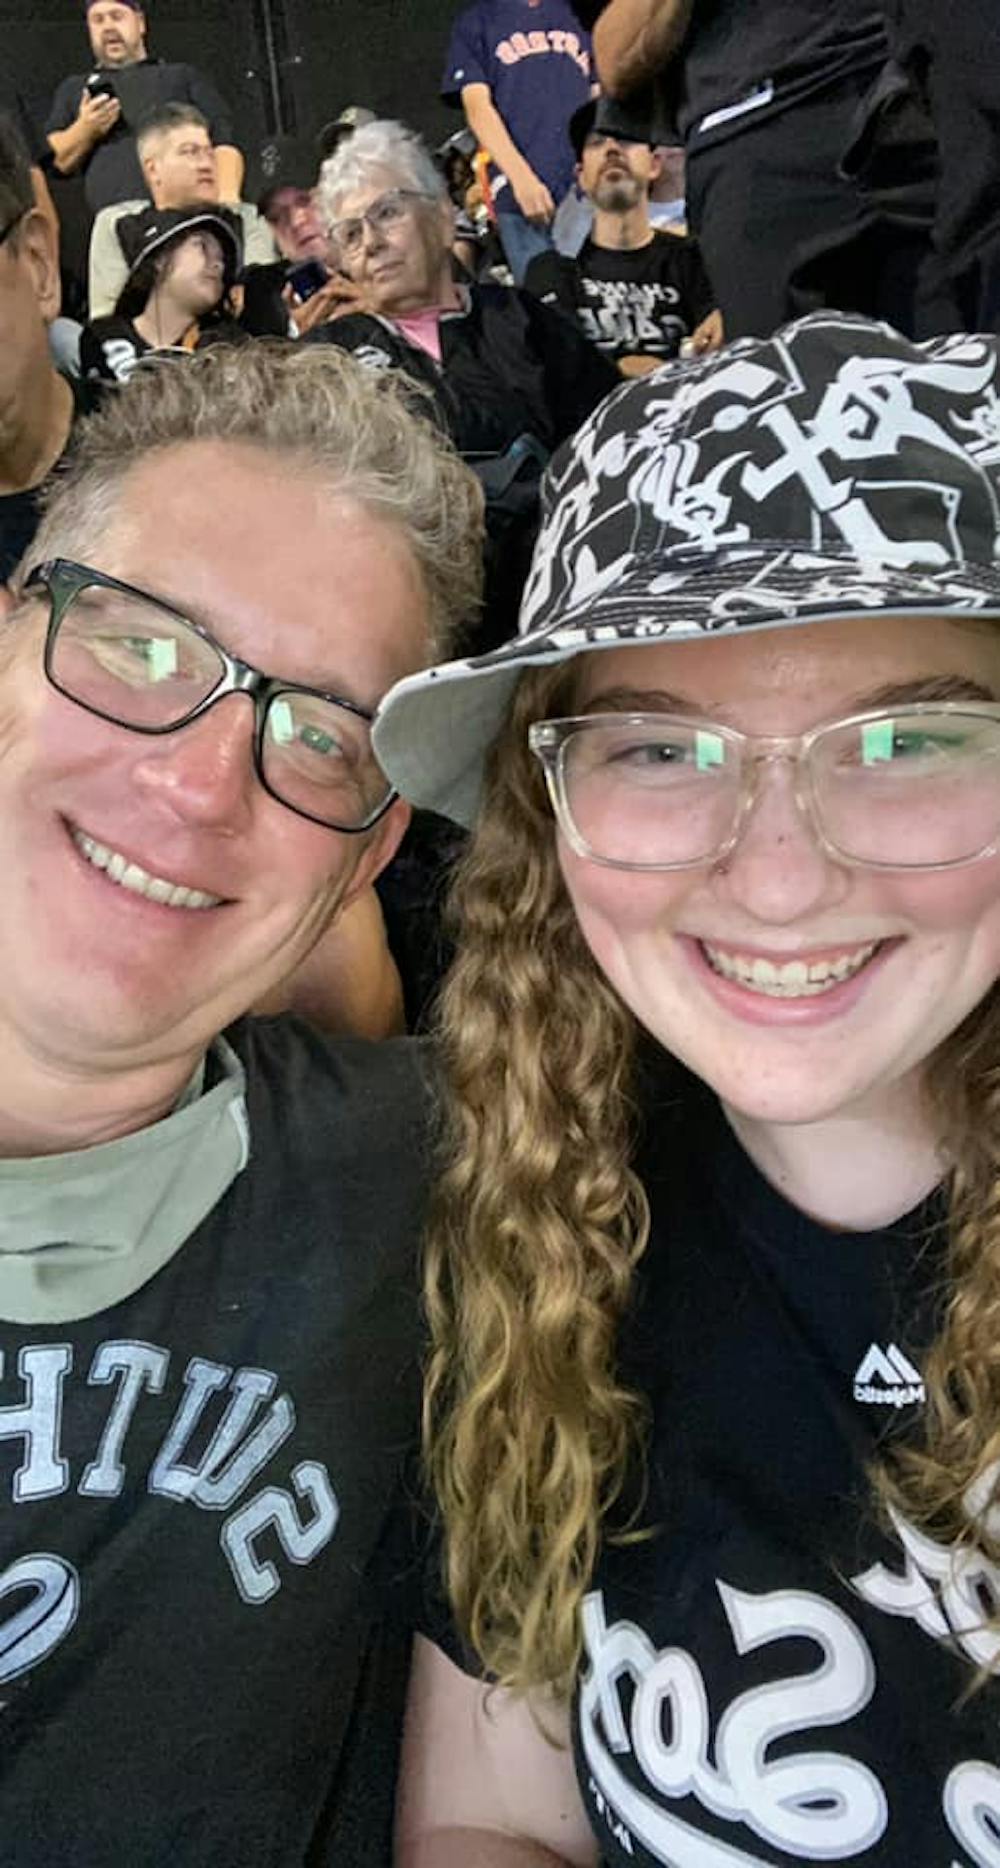 Madeline attended the White Sox's first 2021 playoff game with her dad.